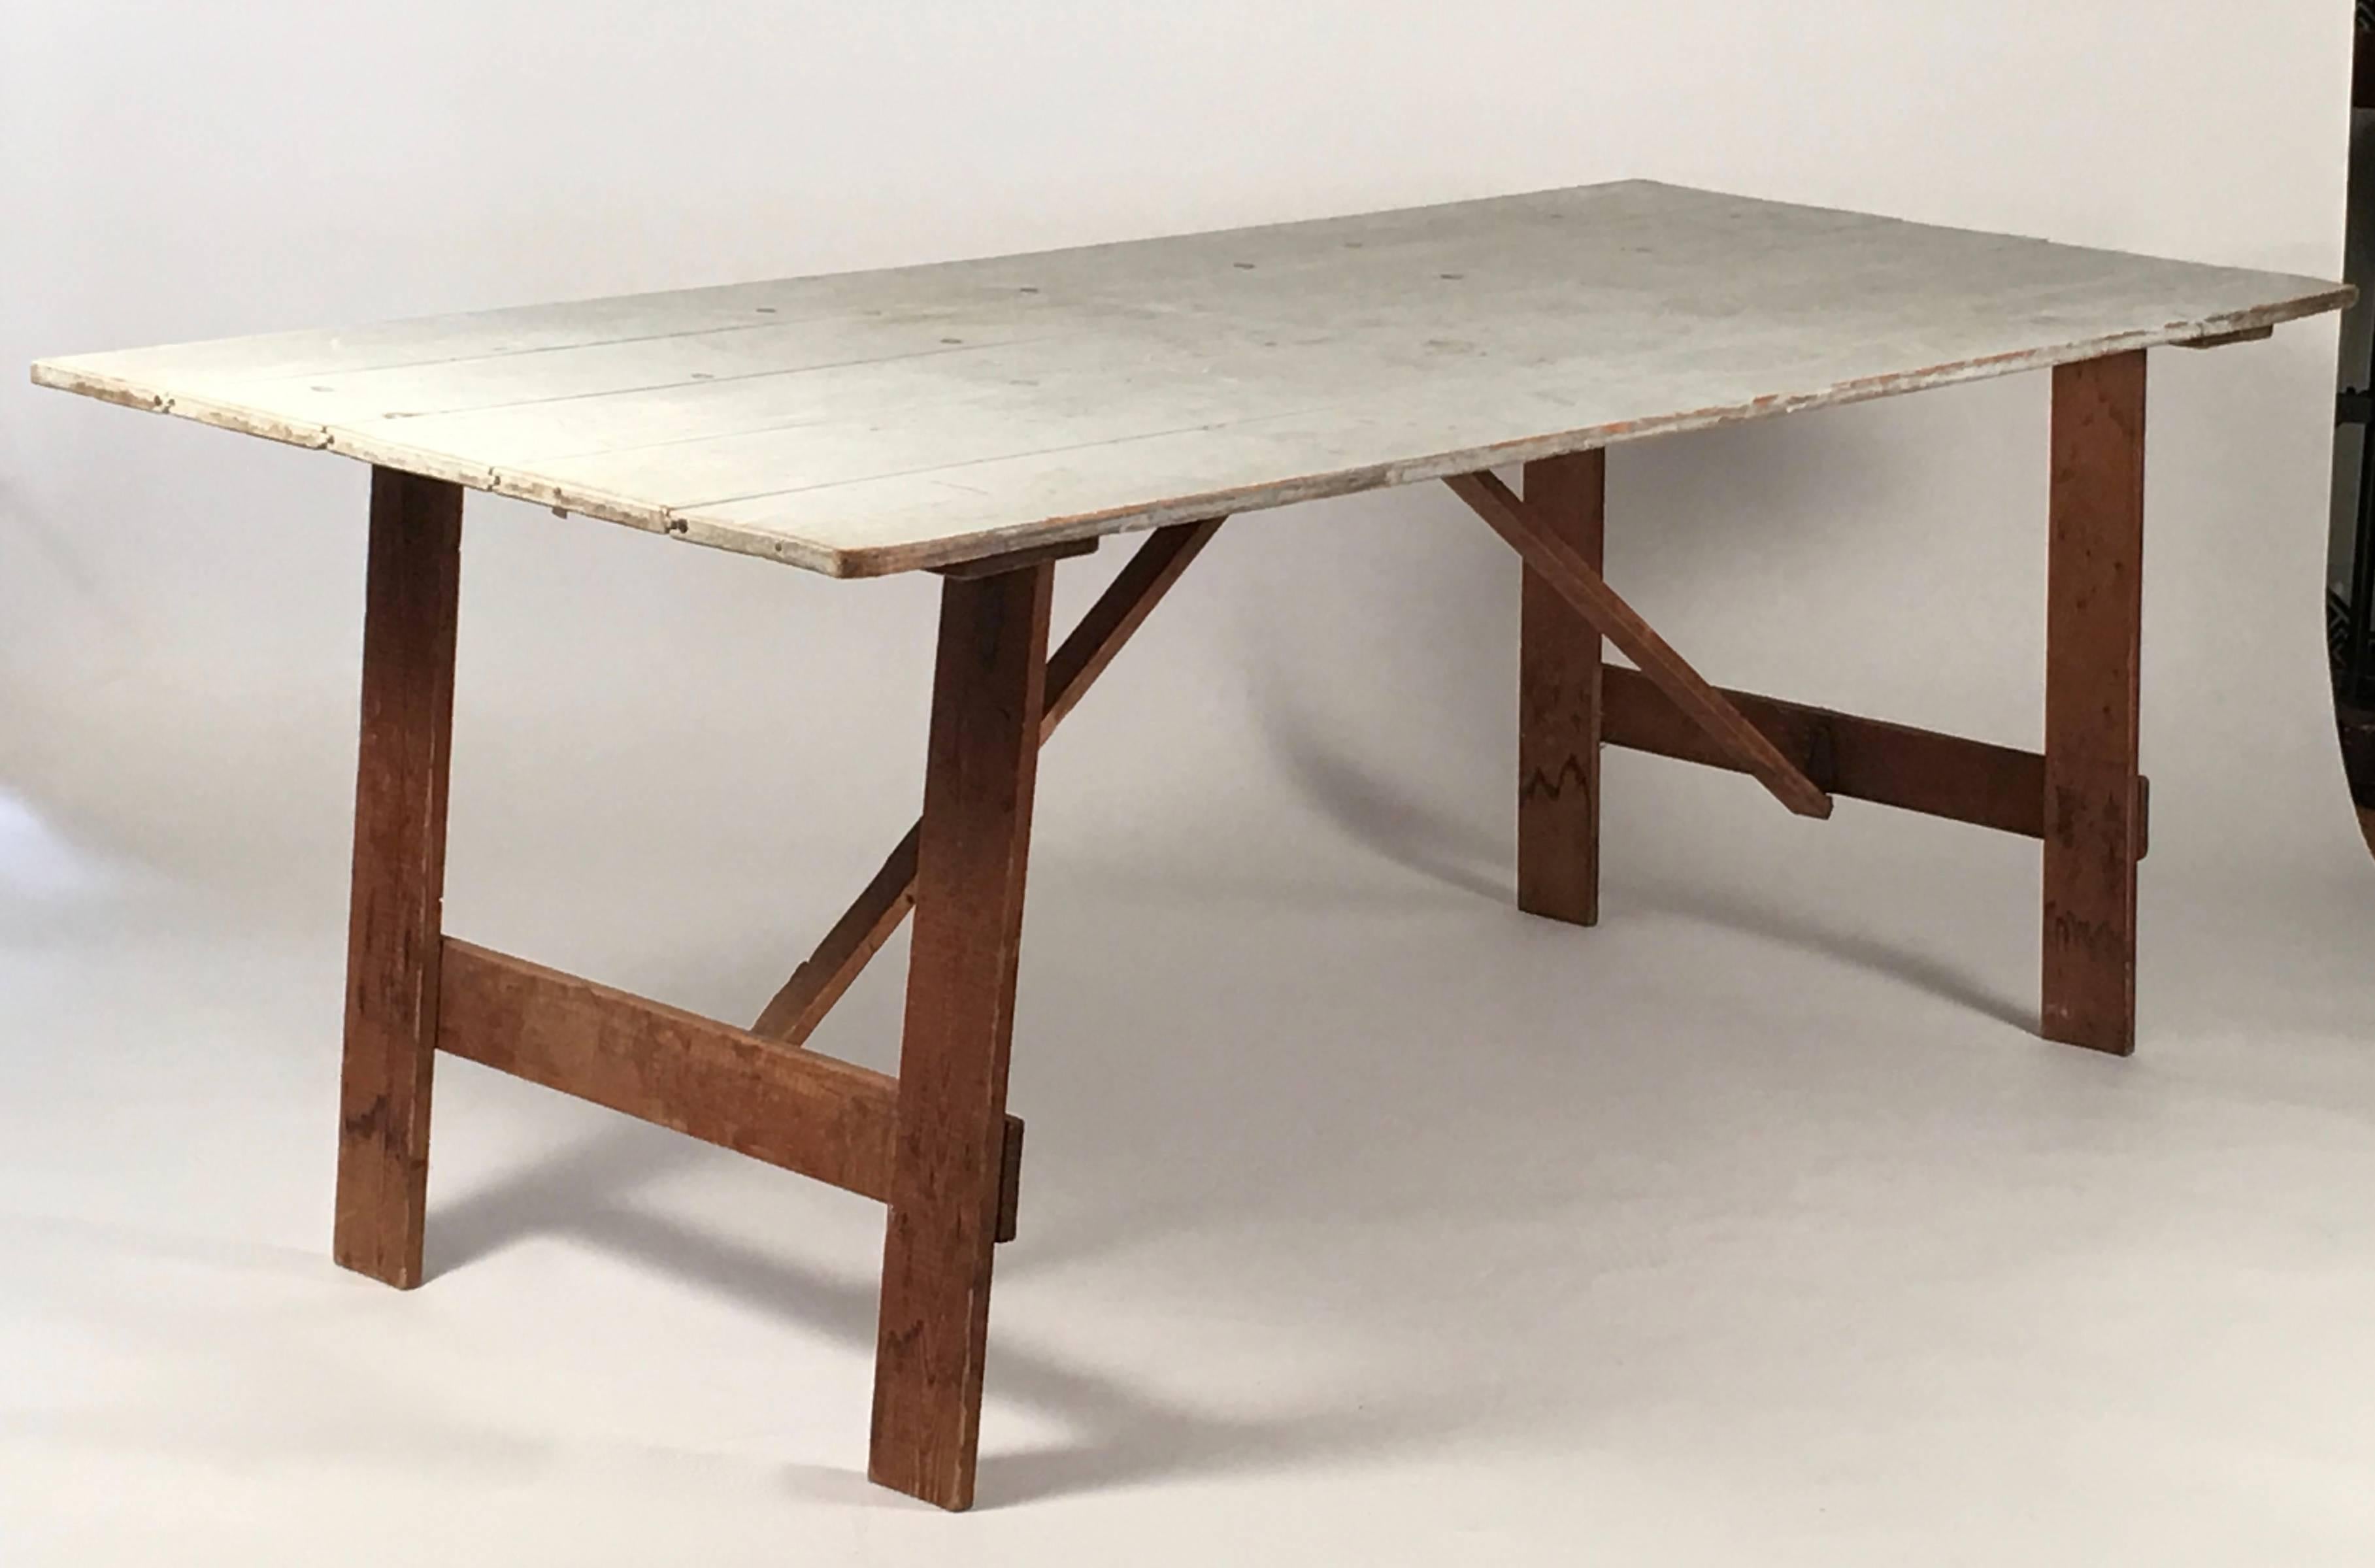 A country folding trestle clam bake table, the top made with wood boards in beautiful old light blue paint, over four legs joined by cross stretchers and further reinforced with diagonal cross stretchers, all of which are hinged and fold to make the